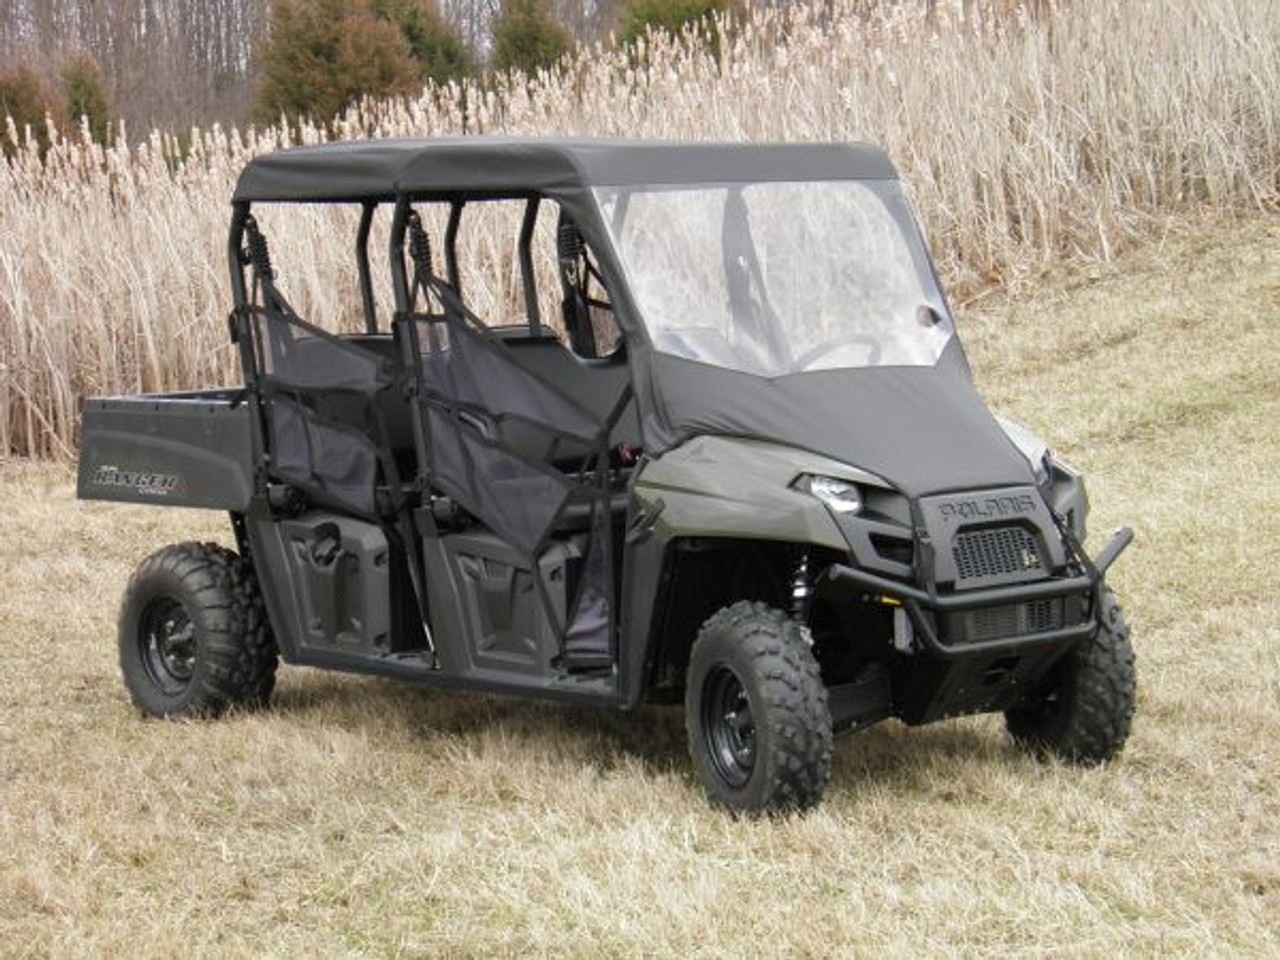 3 Star side x side Polaris Ranger Crew 570-4 vinyl windshield and top front and side angle view